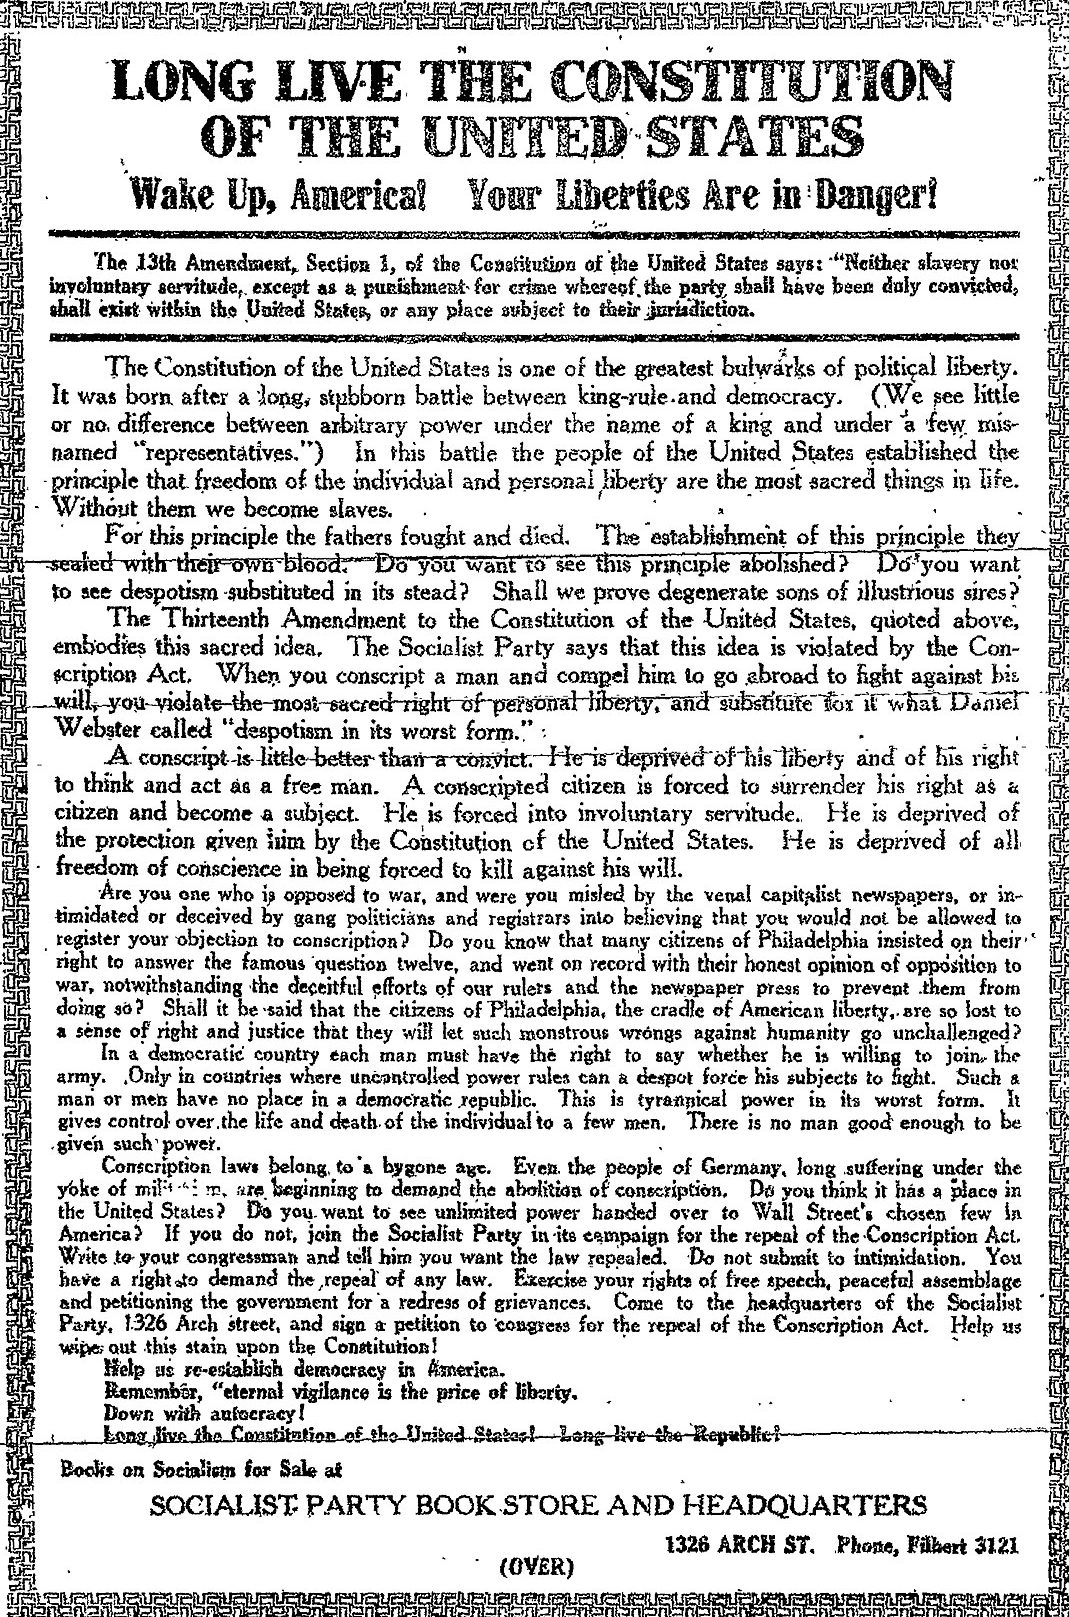 Leaflet titled 'Long Live the Constitution of the United States'